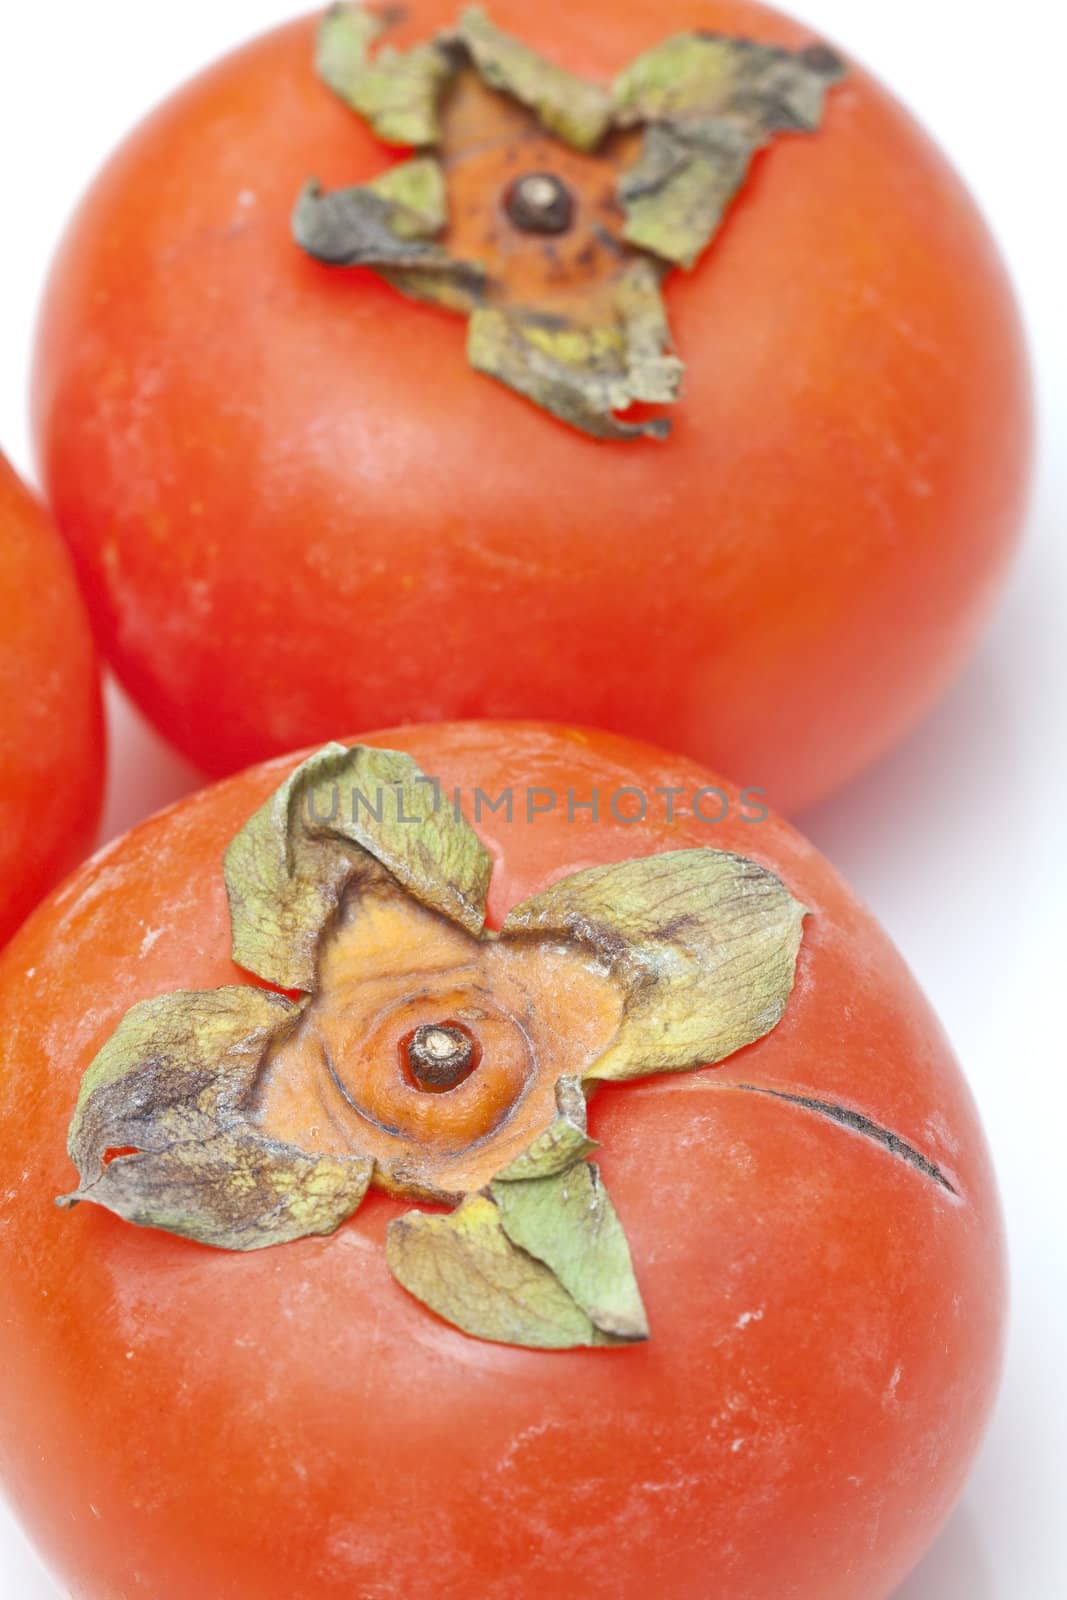 Orange persimmons isolated on white background by kawing921